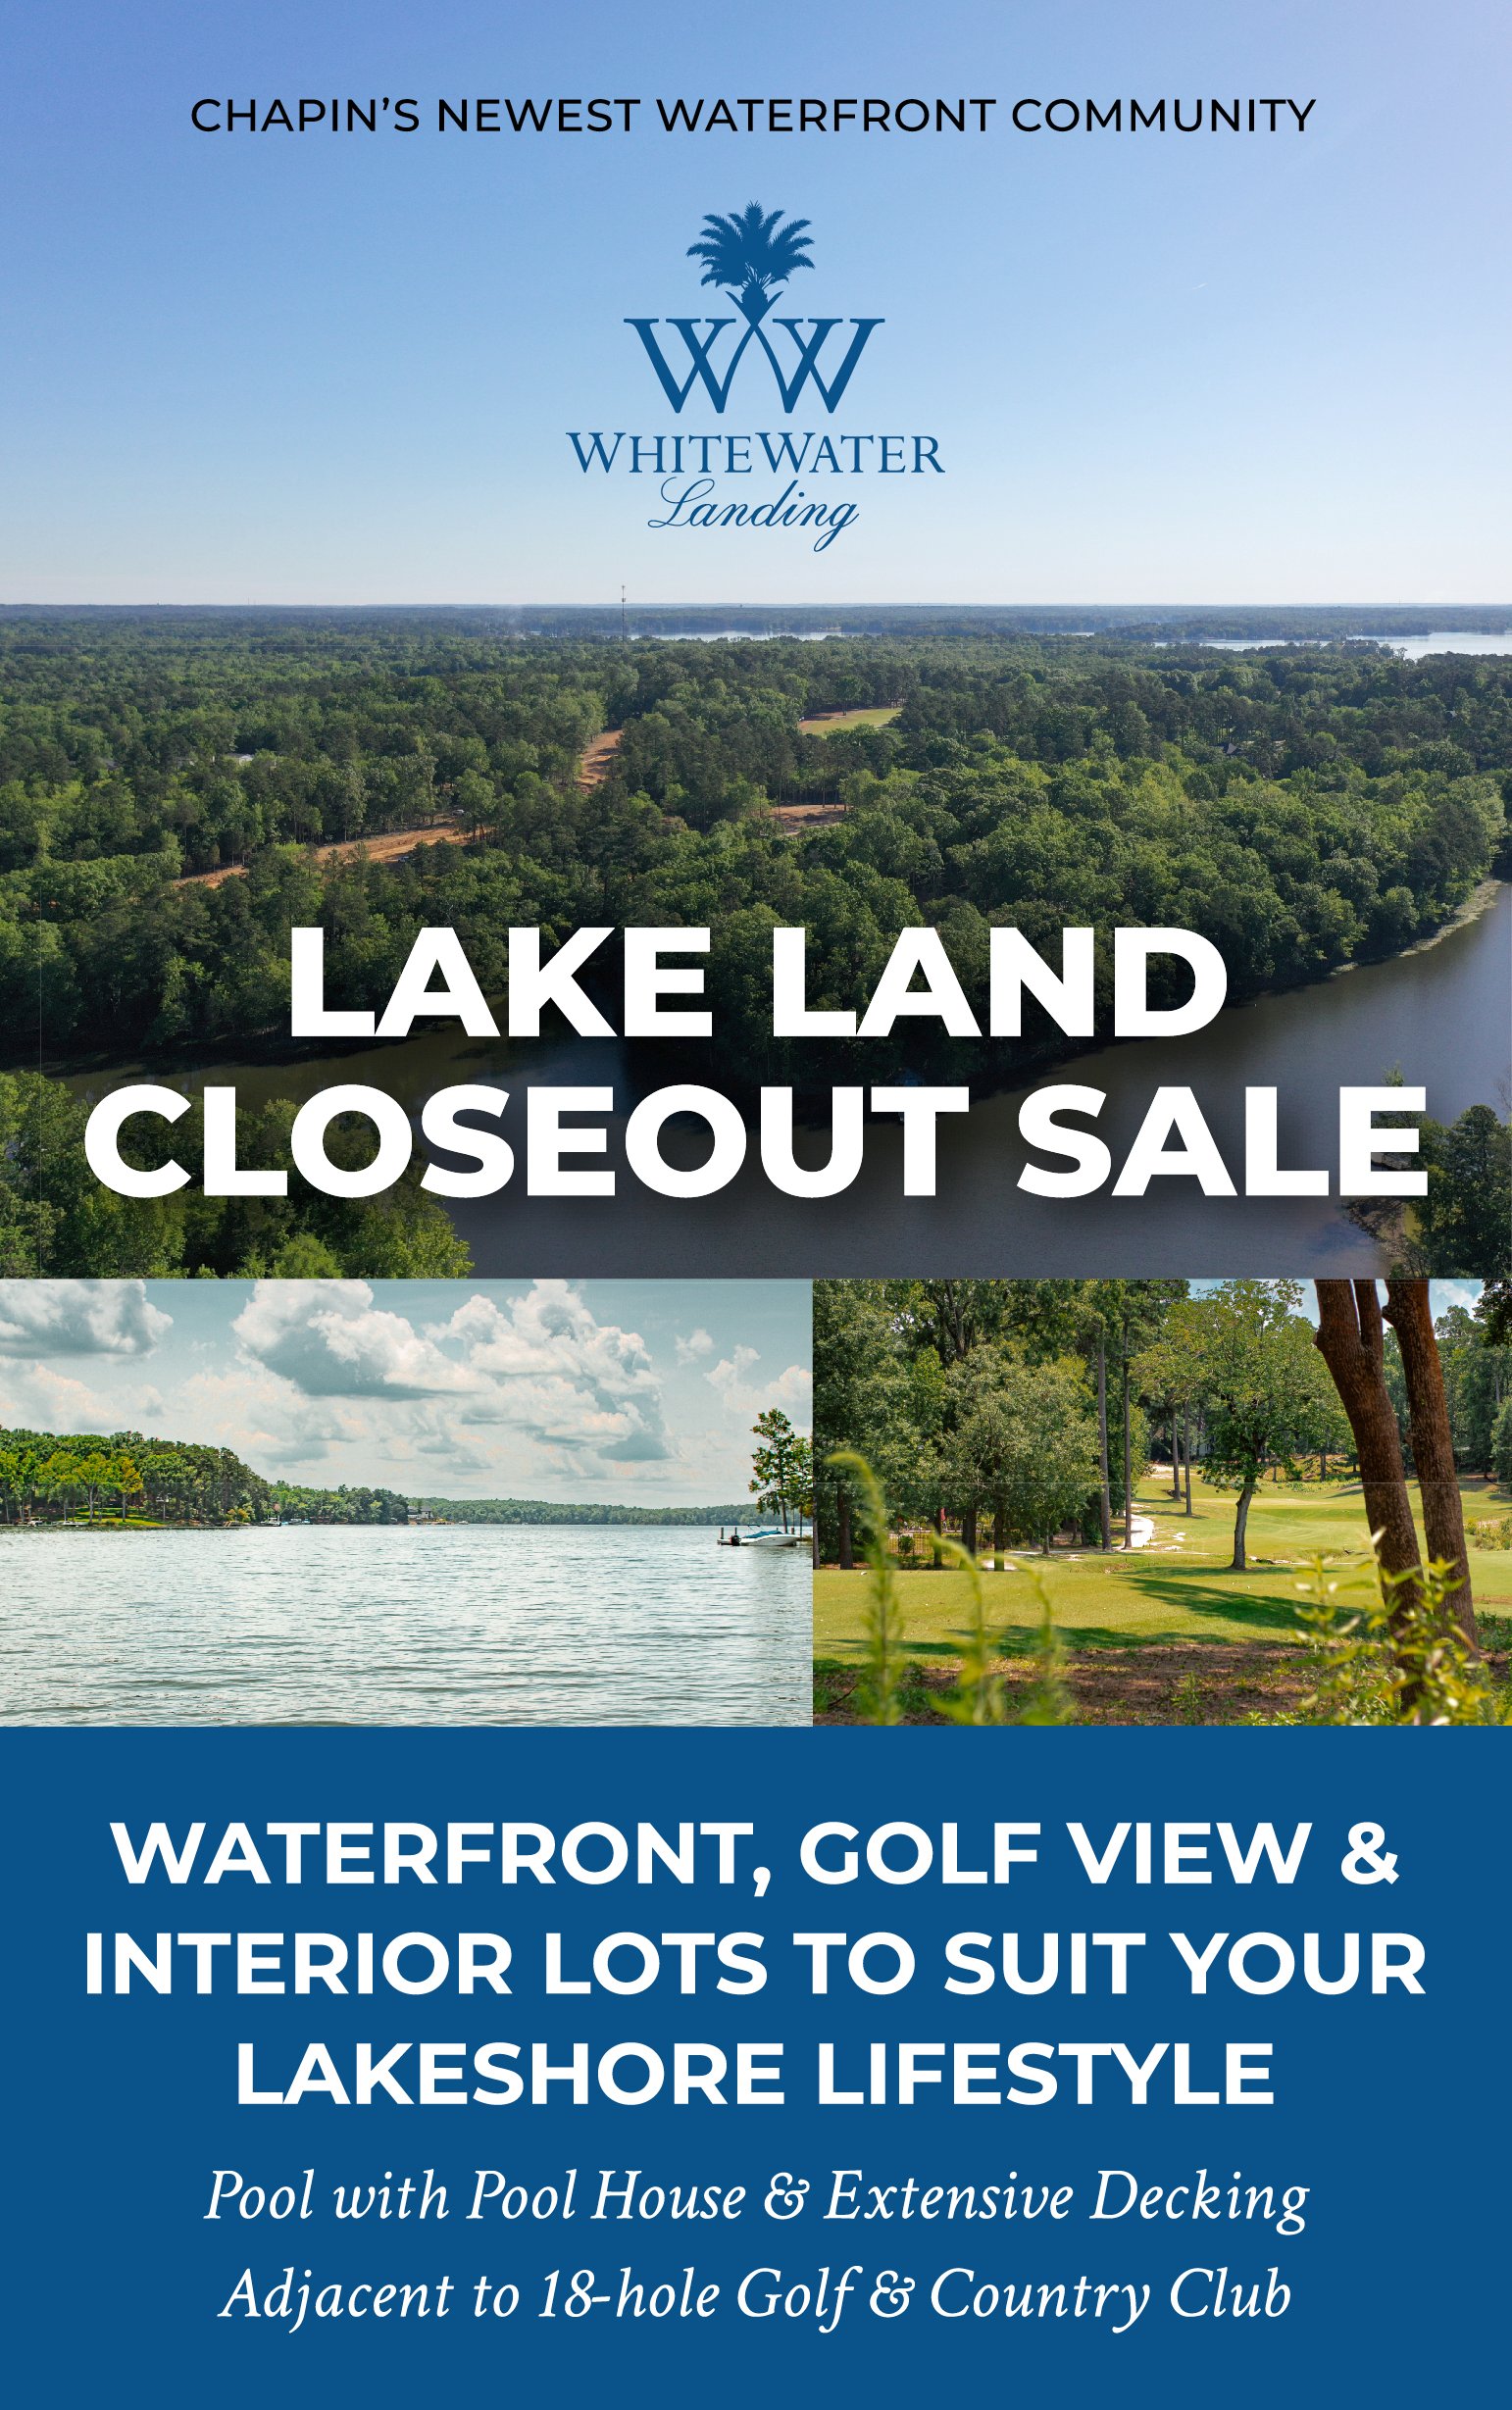 WHITE WATER Landing. LAKELAND CLOSEOUT SALE. WATERFRONT, GOLF VIEW & INTERIOR LOTS TO SUIT YOUR LAKESHORE LIFESTYLE. Pool with Pool House & Extensive Decking Adjacent to 18-hole Gold & Country Club